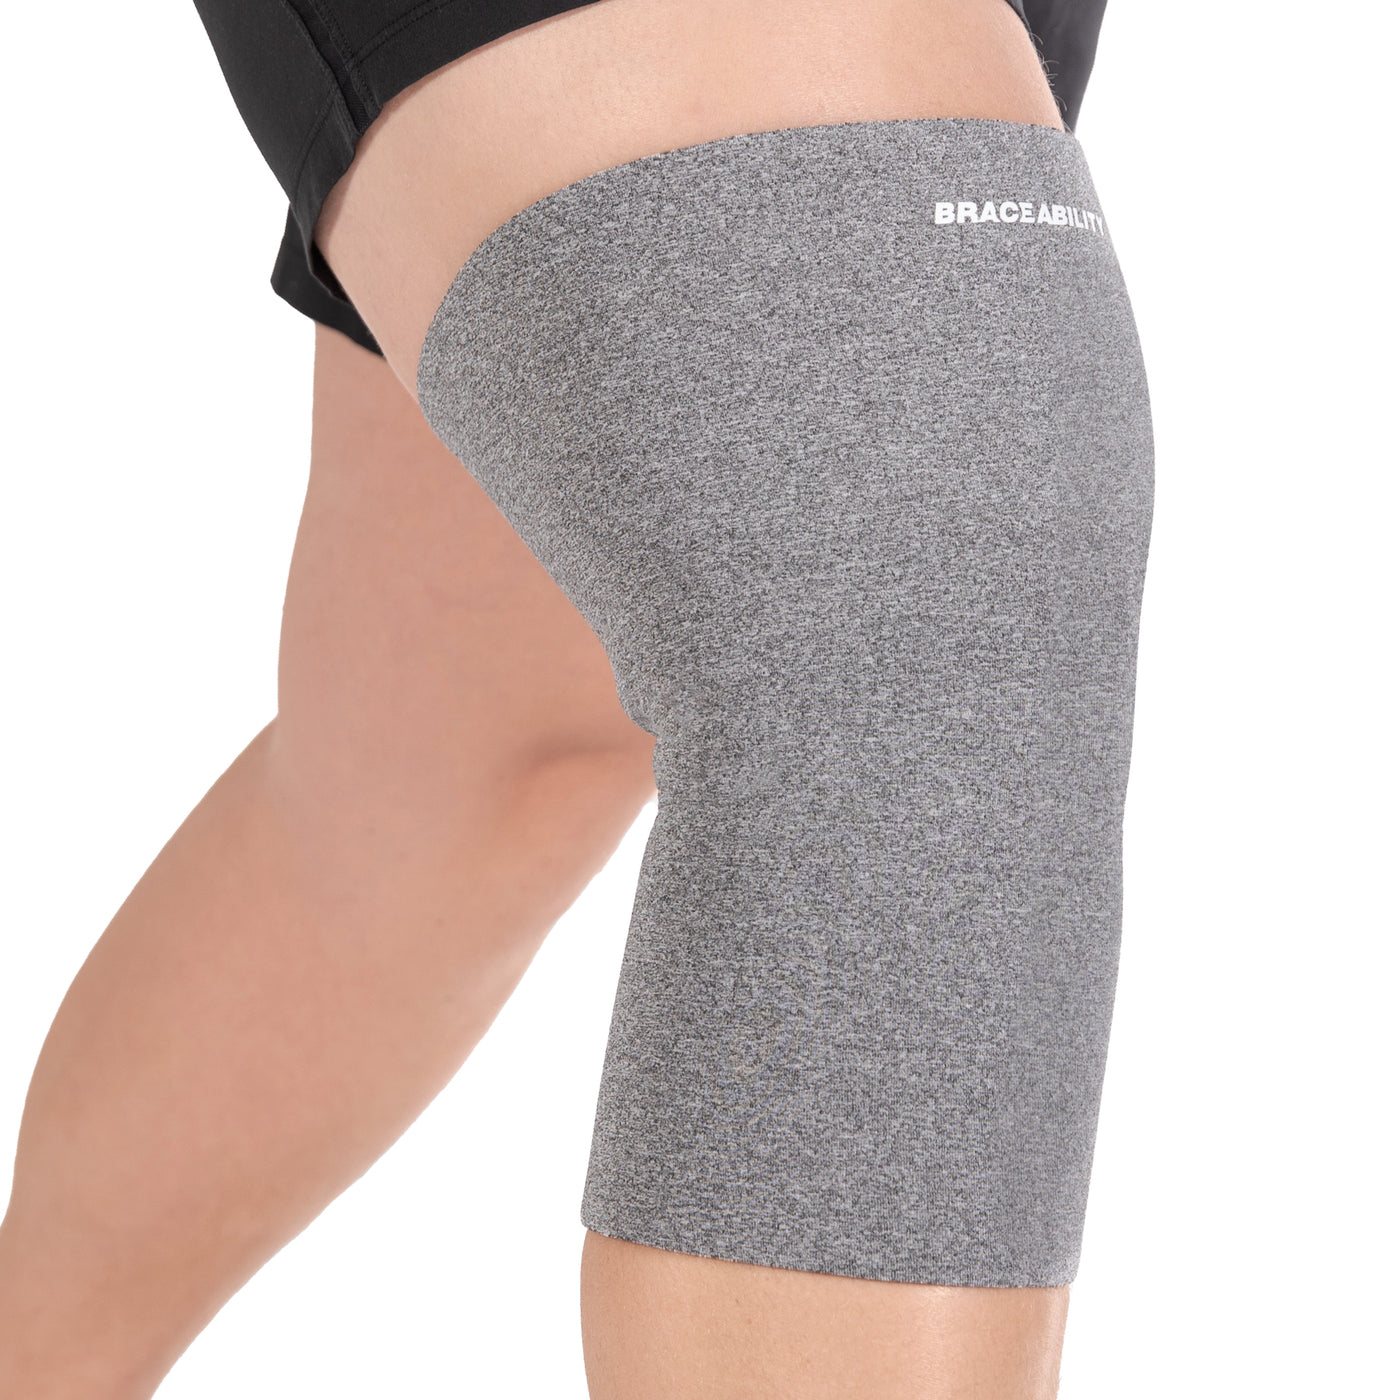 Sparthos Thigh Compression Sleeves (Pair) – Upper Leg Sleeves for